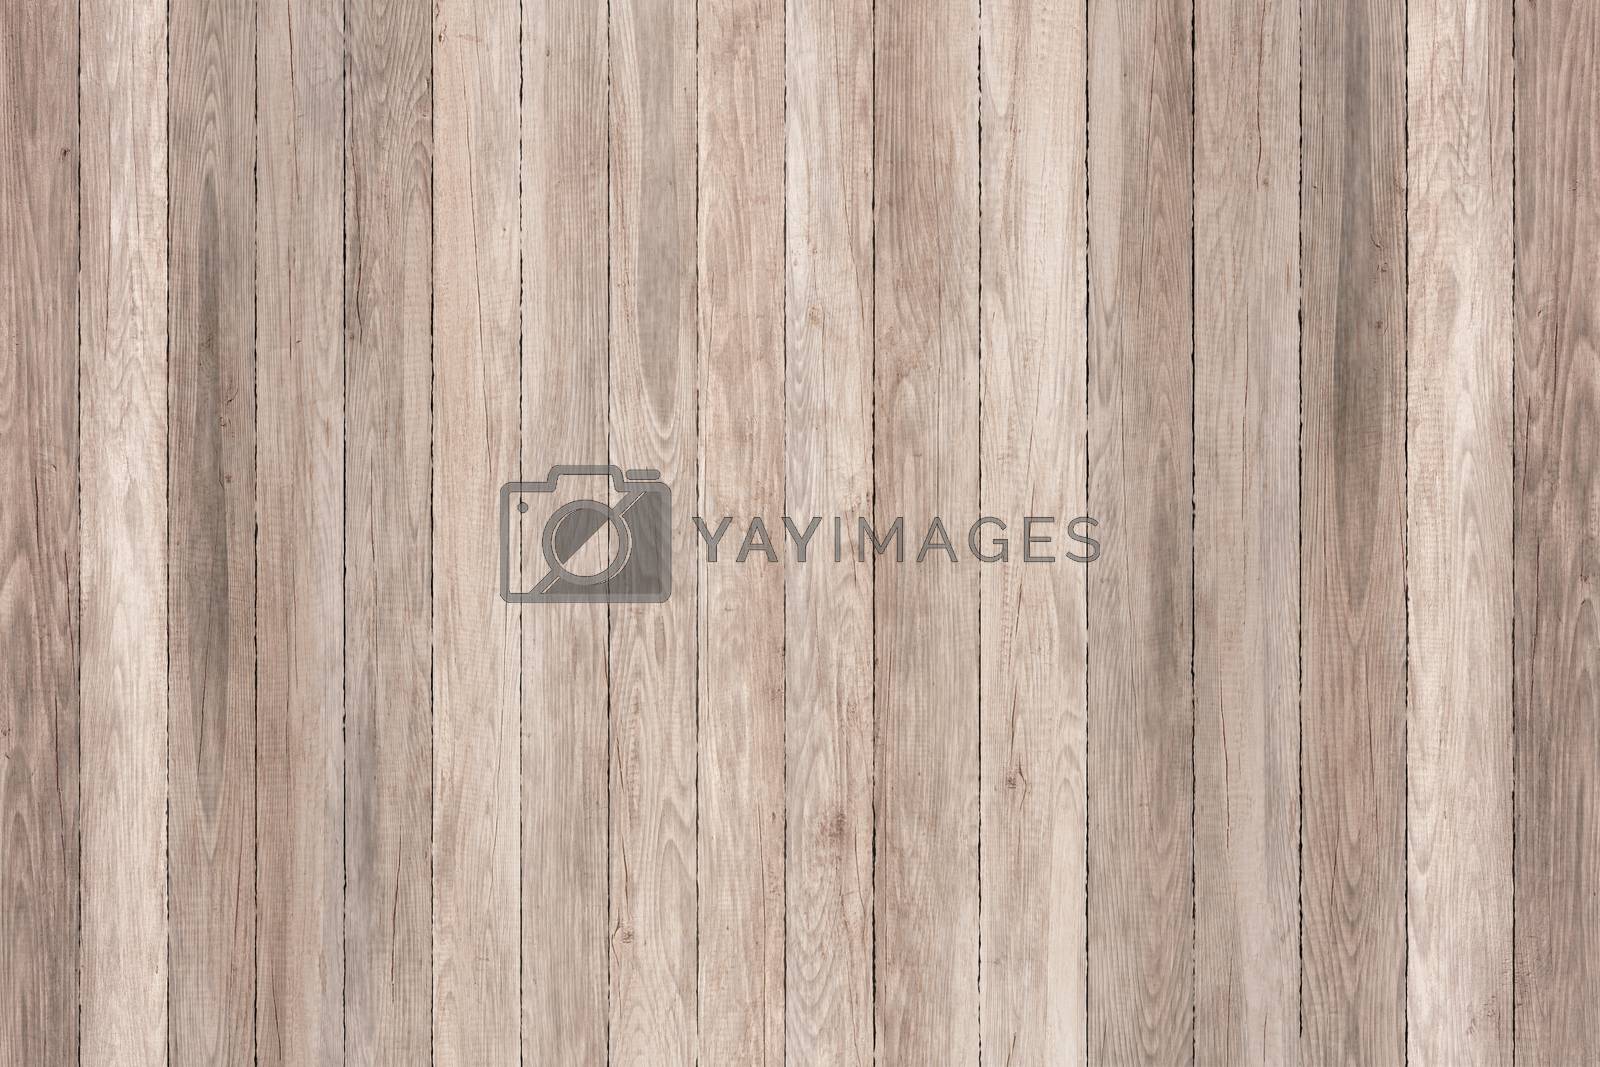 Royalty free image of Light grunge wood panels. Planks Background. Old wall wooden vintage floor by ivo_13